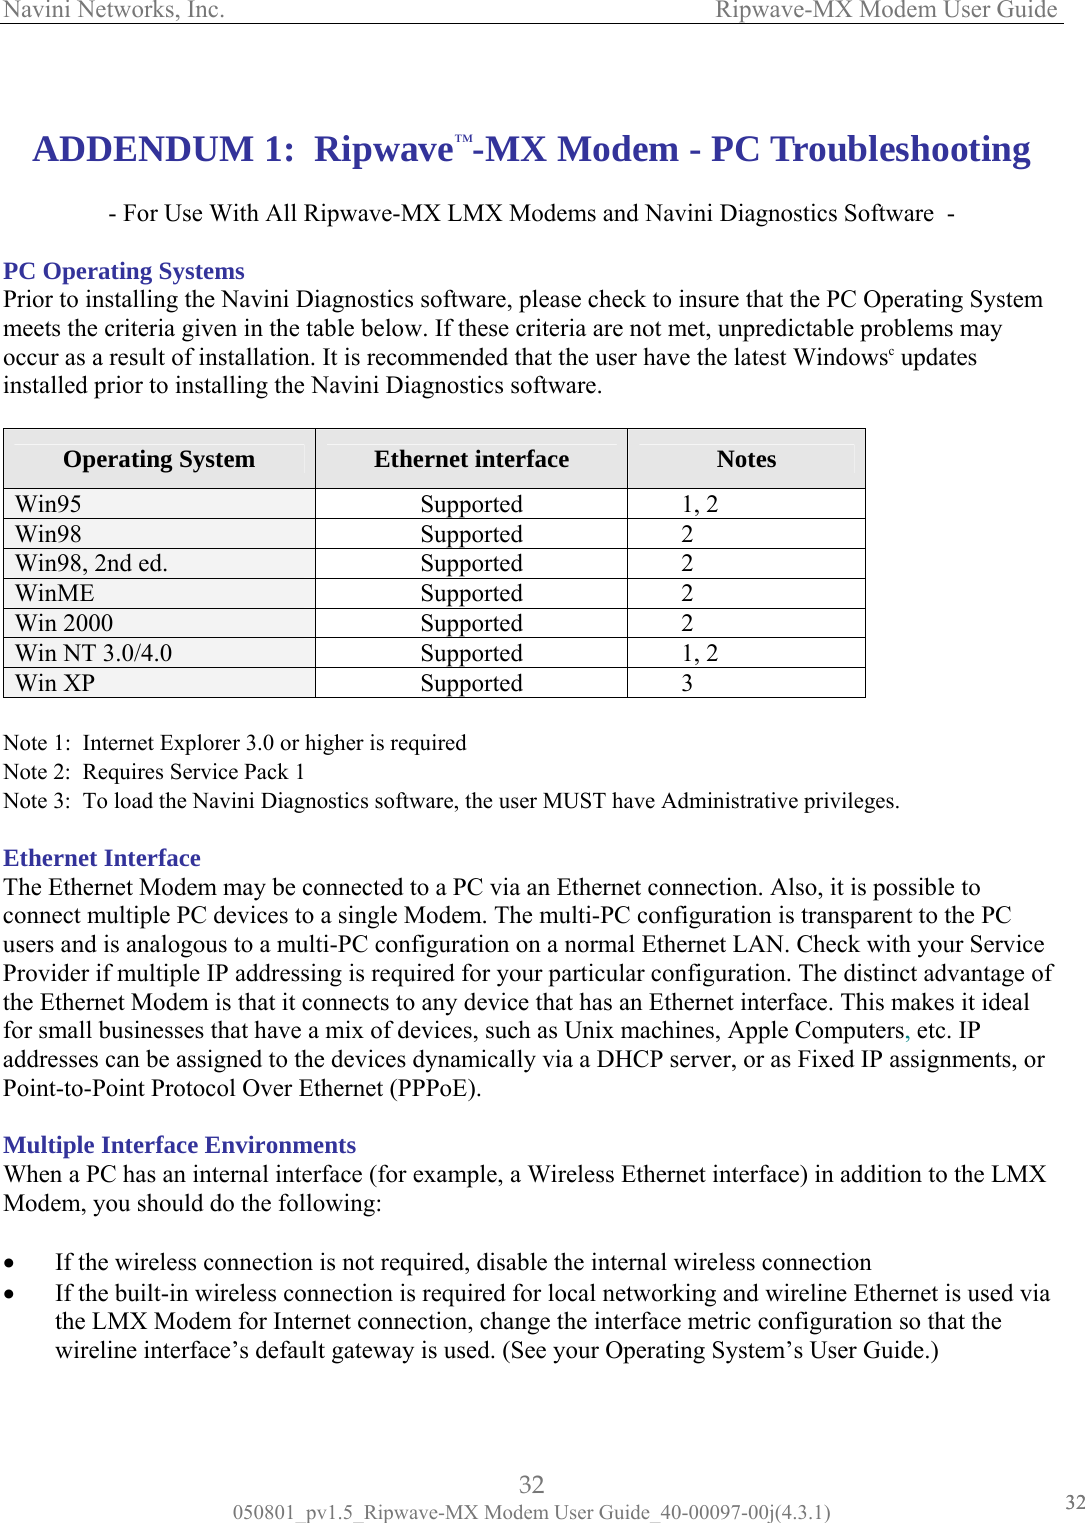 Navini Networks, Inc.                   Ripwave-MX Modem User Guide   3232ADDENDUM 1:  R Troubleshooting - For Use With AllC Operating Systems rior to installing the Navini  System eets the criteria given in the tab ay ccur as a result of installation. It  stalled prior to installing the Naipwave™-MX Modem - PC   Ripwave-MX LMX Modems and Navini Diagnostics Software  -  PP Diagnostics software, please check to insure that the PC Operating le below. If these criteria are not met, unpredictable problems m is recommended that the user have the latest Windowsmoc updatesvini Diagnostics software. in Operating System  Ethernet interface  Notes Win95  Supported 1, 2 Win98  Supported 2 Win98, 2nd ed.  Supported 2 WinME  Supported 2 Win 2000  Supported 2 Win NT 3.0/4.0  Supported 1, 2 Win XP  Supported 3  Note 1:  Internet Explorer 3.0 orote 2:  Requires Service Pack 1 ileges. thernet Interface he Ethernet Modem may be con  onnect multiple PC devices to a  PC sers and is analogous to a multi- thernet LAN. Check with your Service rovider if multiple IP addressing is required for your particular configuration. The distinct advantage of e Ethernet Modem is that it s it ideal r small businesses that have a m  ddresses can be assigned to the d ents, or oint-to-Point Protocol Over Eth E). ultiple Interface Environmhen a PC has an internal in  LMX odem, you should do the fo If the wireless connectio If the built-in wireless connection is required for local networking and wireline Ethernet is used via the LMX Modem for Int hat the wireline interface’s defa  higher is required tics software, the user MUST have Administrative privNNote 3:  To load the Navini Diagnos ET nected to a PC via an Ethernet connection. Also, it is possible tosingle Modem. The multi-PC configuration is transparent to the PC configuration on a normal EcuPth  connects to any device that has an Ethernet interface. This makeix of devices, such as Unix machines, Apple Computers, etc. IPevices dynamically via a DHCP server, or as Fixed IP assignmernet (PPPofoaP M ents terface (for example, a Wireless Ethernet interface) in addition to thellowing: n is not required, disable the internal wireless connection  WM ••ernet connection, change the interface metric configuration so tult gateway is used. (See your Operating System’s User Guide.) 32 050801_pv1.5_Ripwave-MX Modem User Guide_40-00097-00j(4.3.1) 